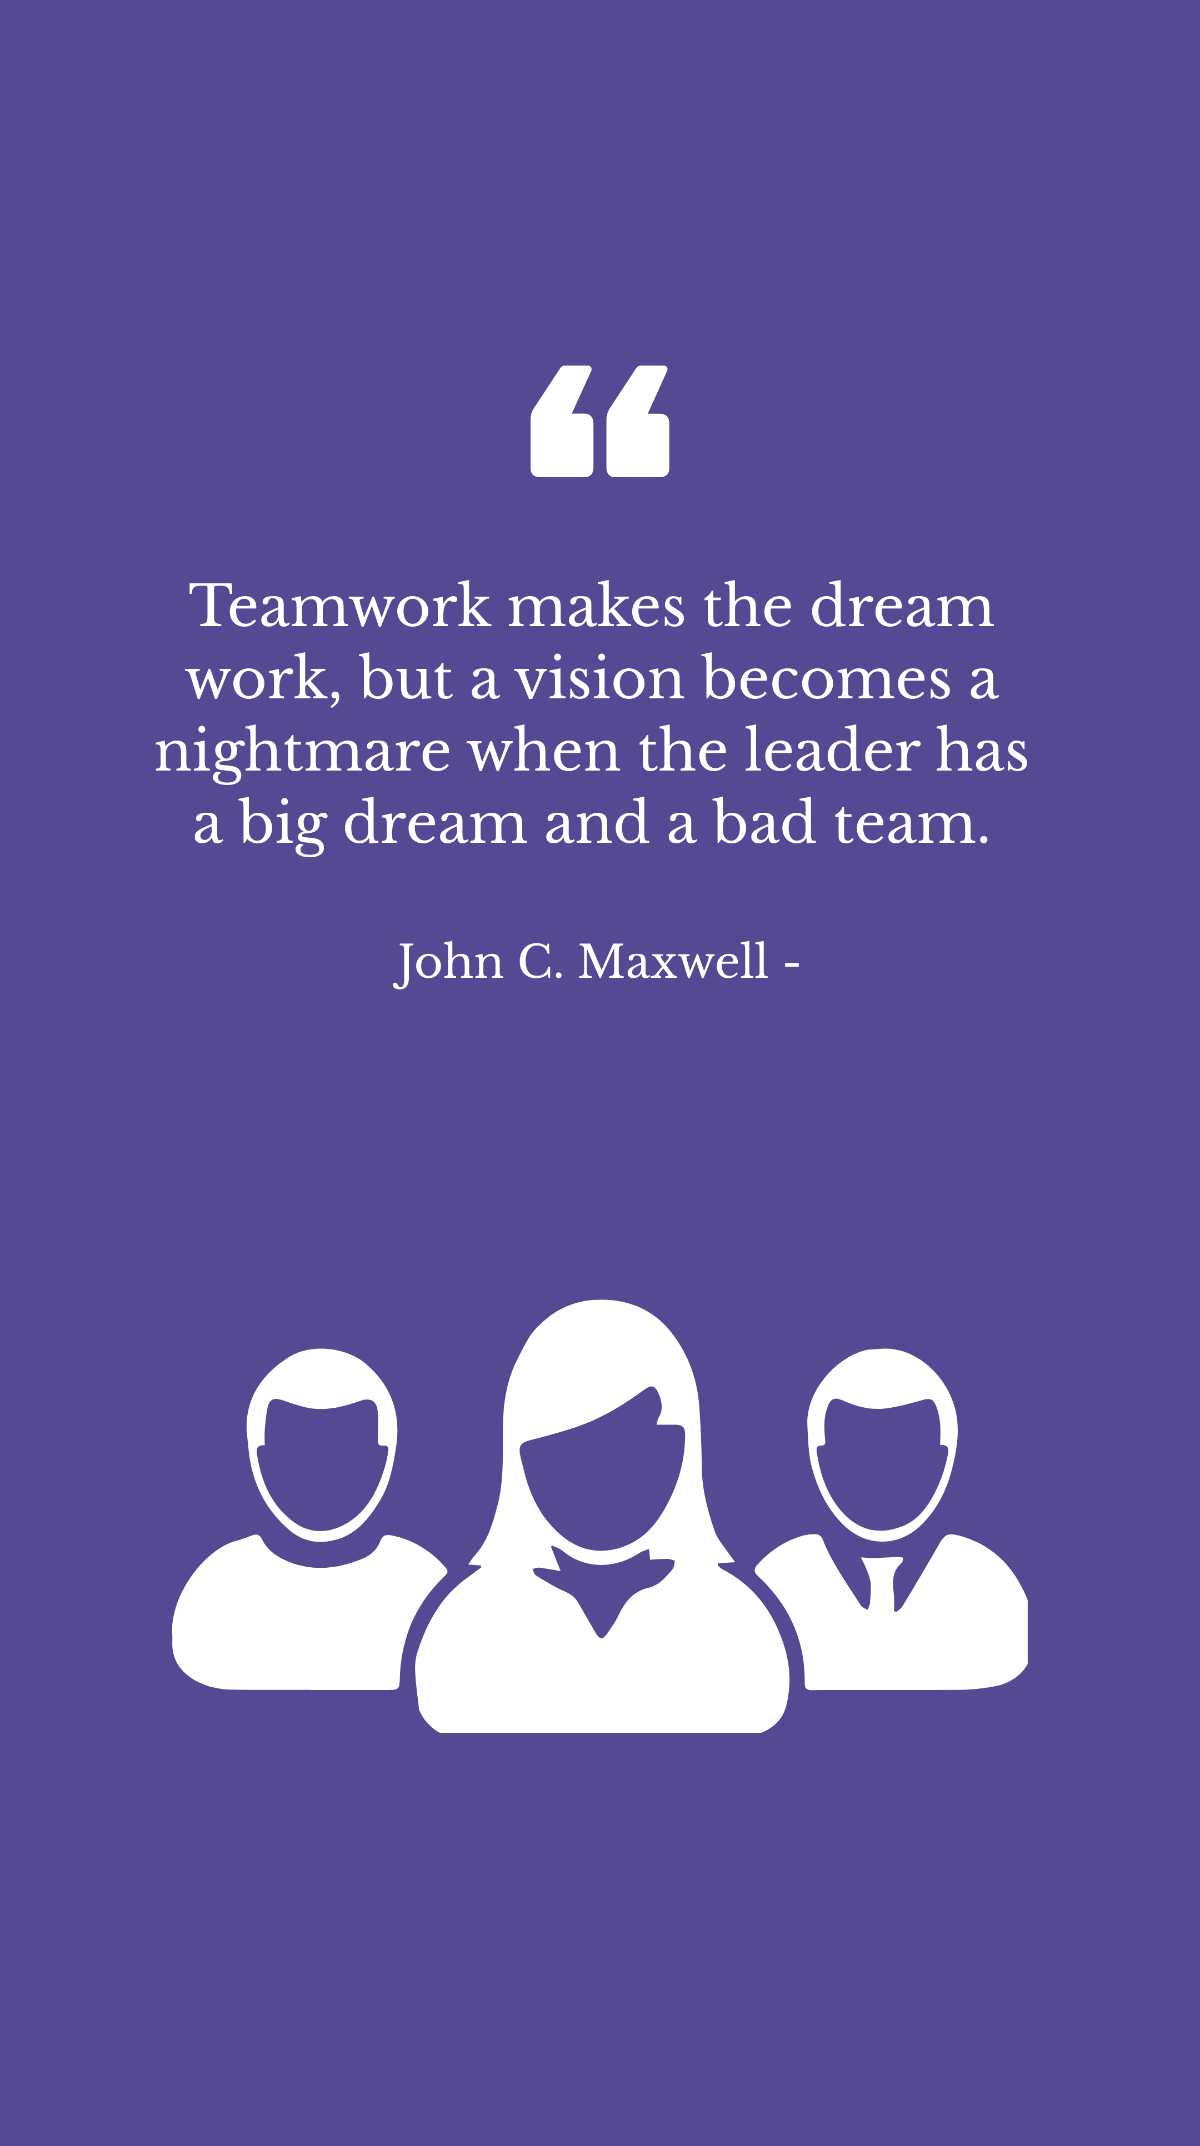 John C. Maxwell - Teamwork makes the dream work, but a vision becomes a nightmare when the leader has a big dream and a bad team.